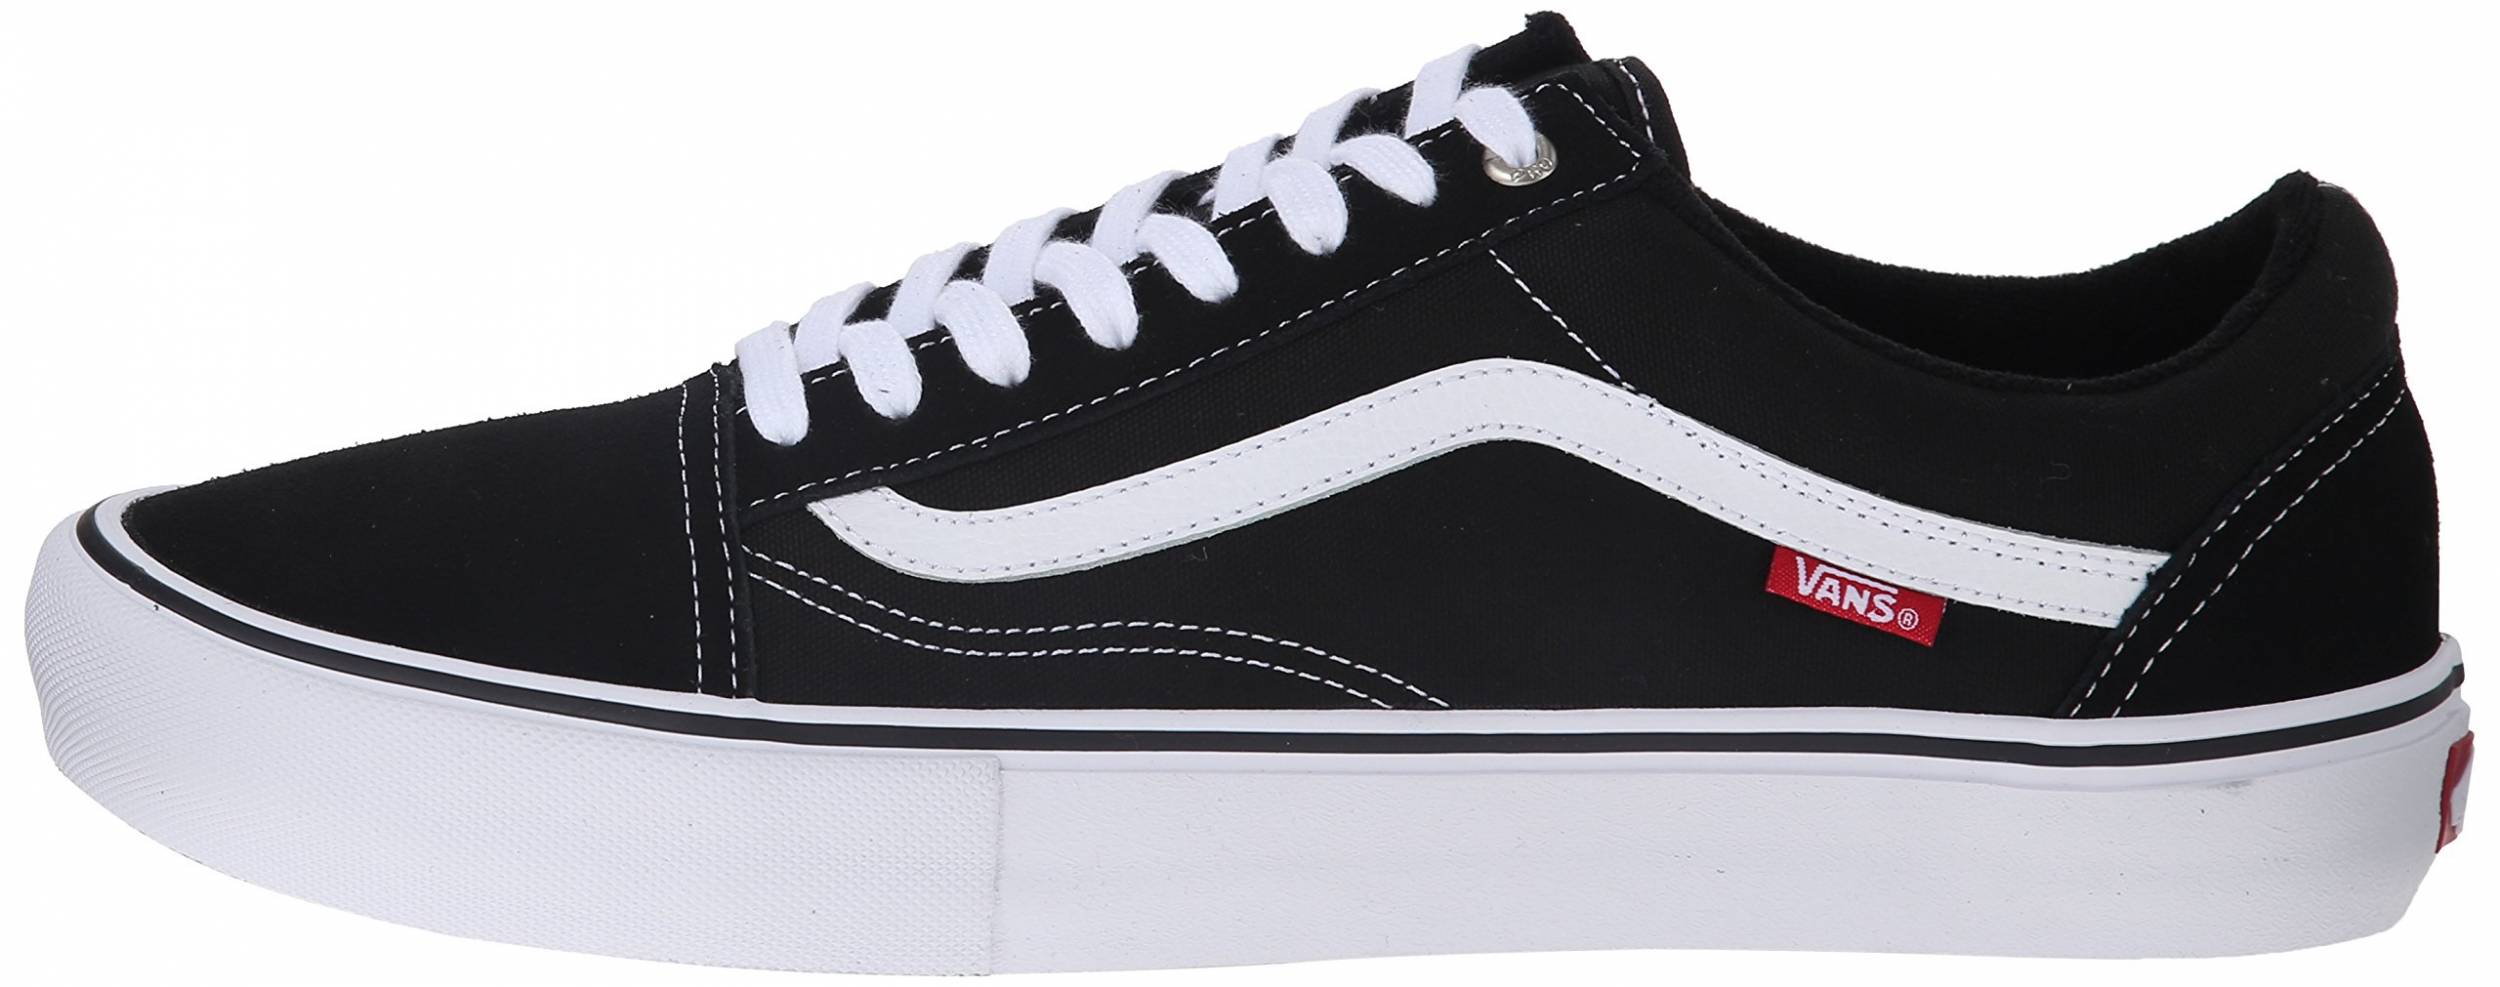 Only $58 + Review of Vans Old Skool Pro 